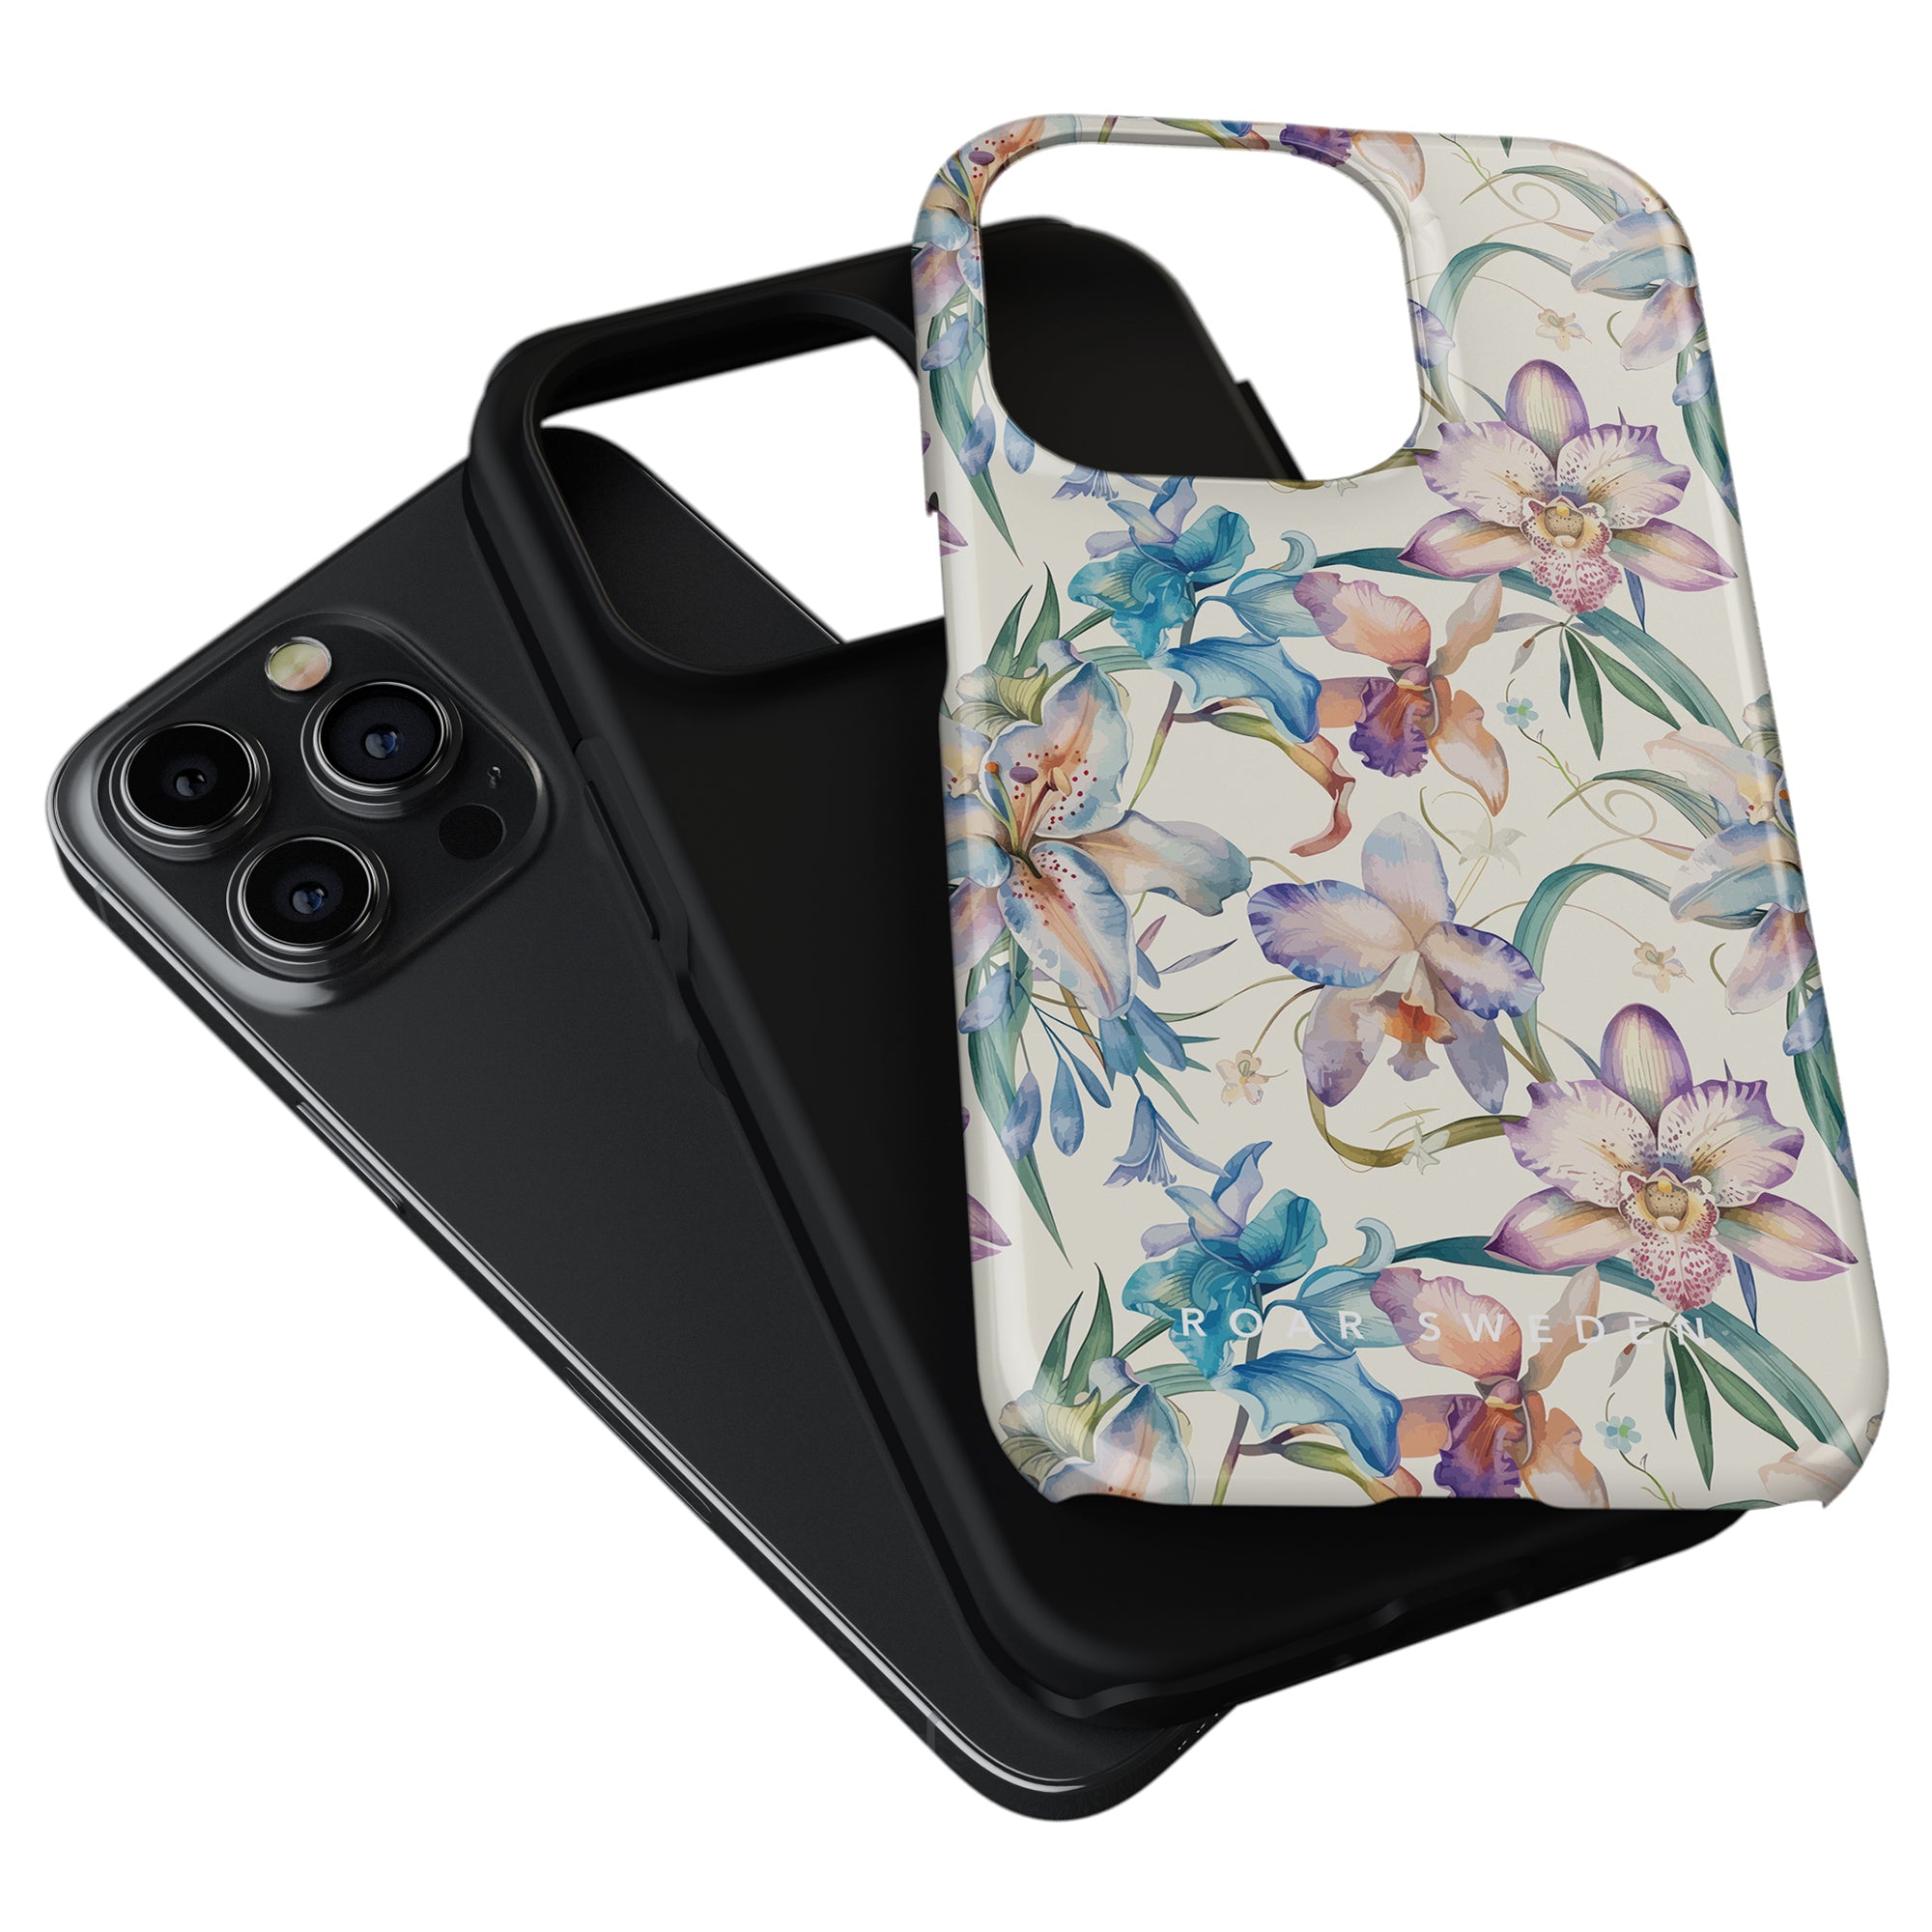 The new Summer Collection features two stunning smartphone cases: one sleek black and the other a vibrant floral design. Displayed stacked, with a smartphone partially visible underneath, the Bouquet - Tough Case showcases the beauty of blommiga smartphone-skal.